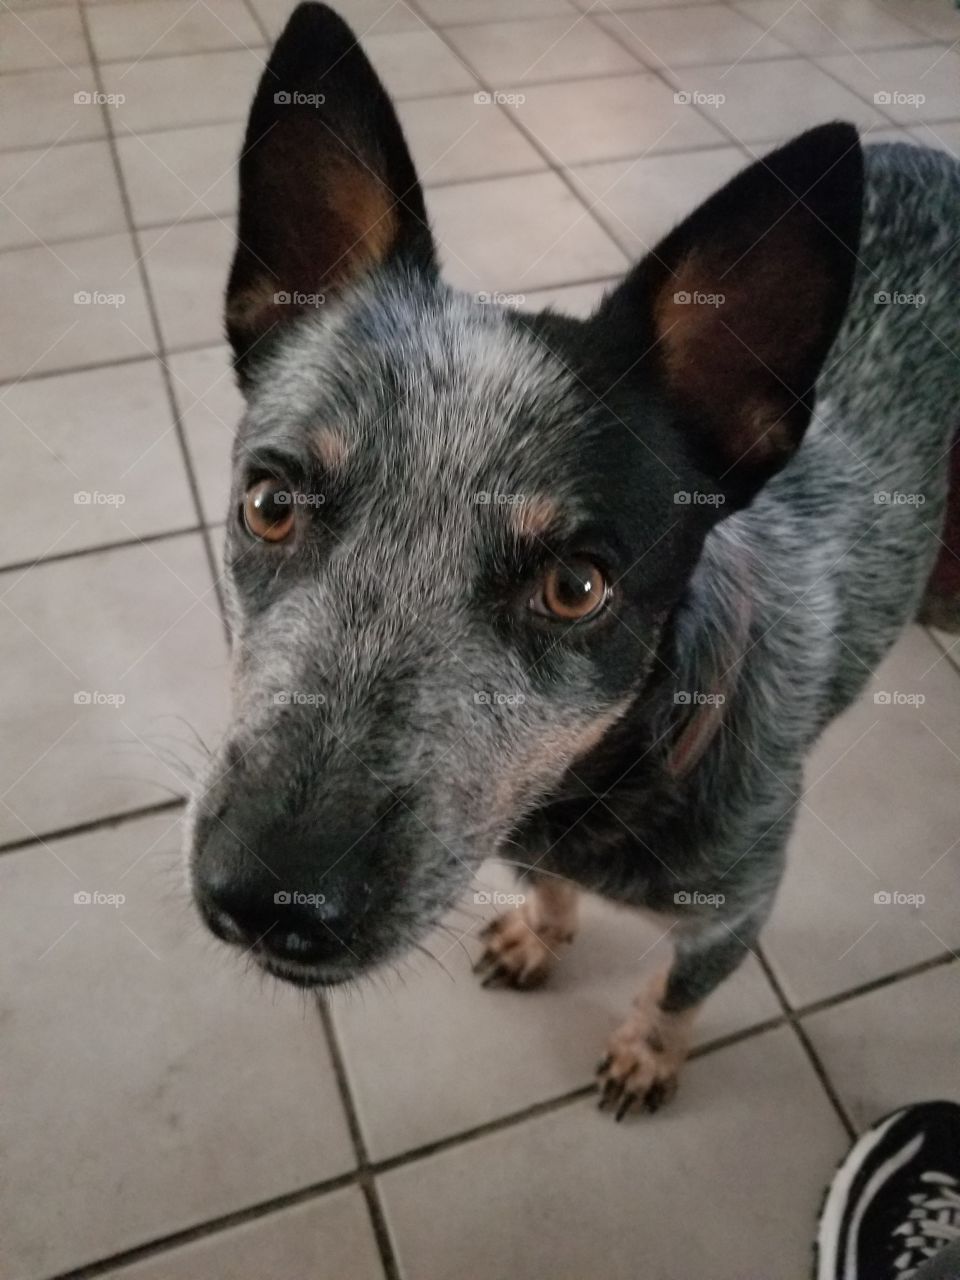 Bleu the Wildchild blue heeler who wont leave his mommys side begging for food and attention